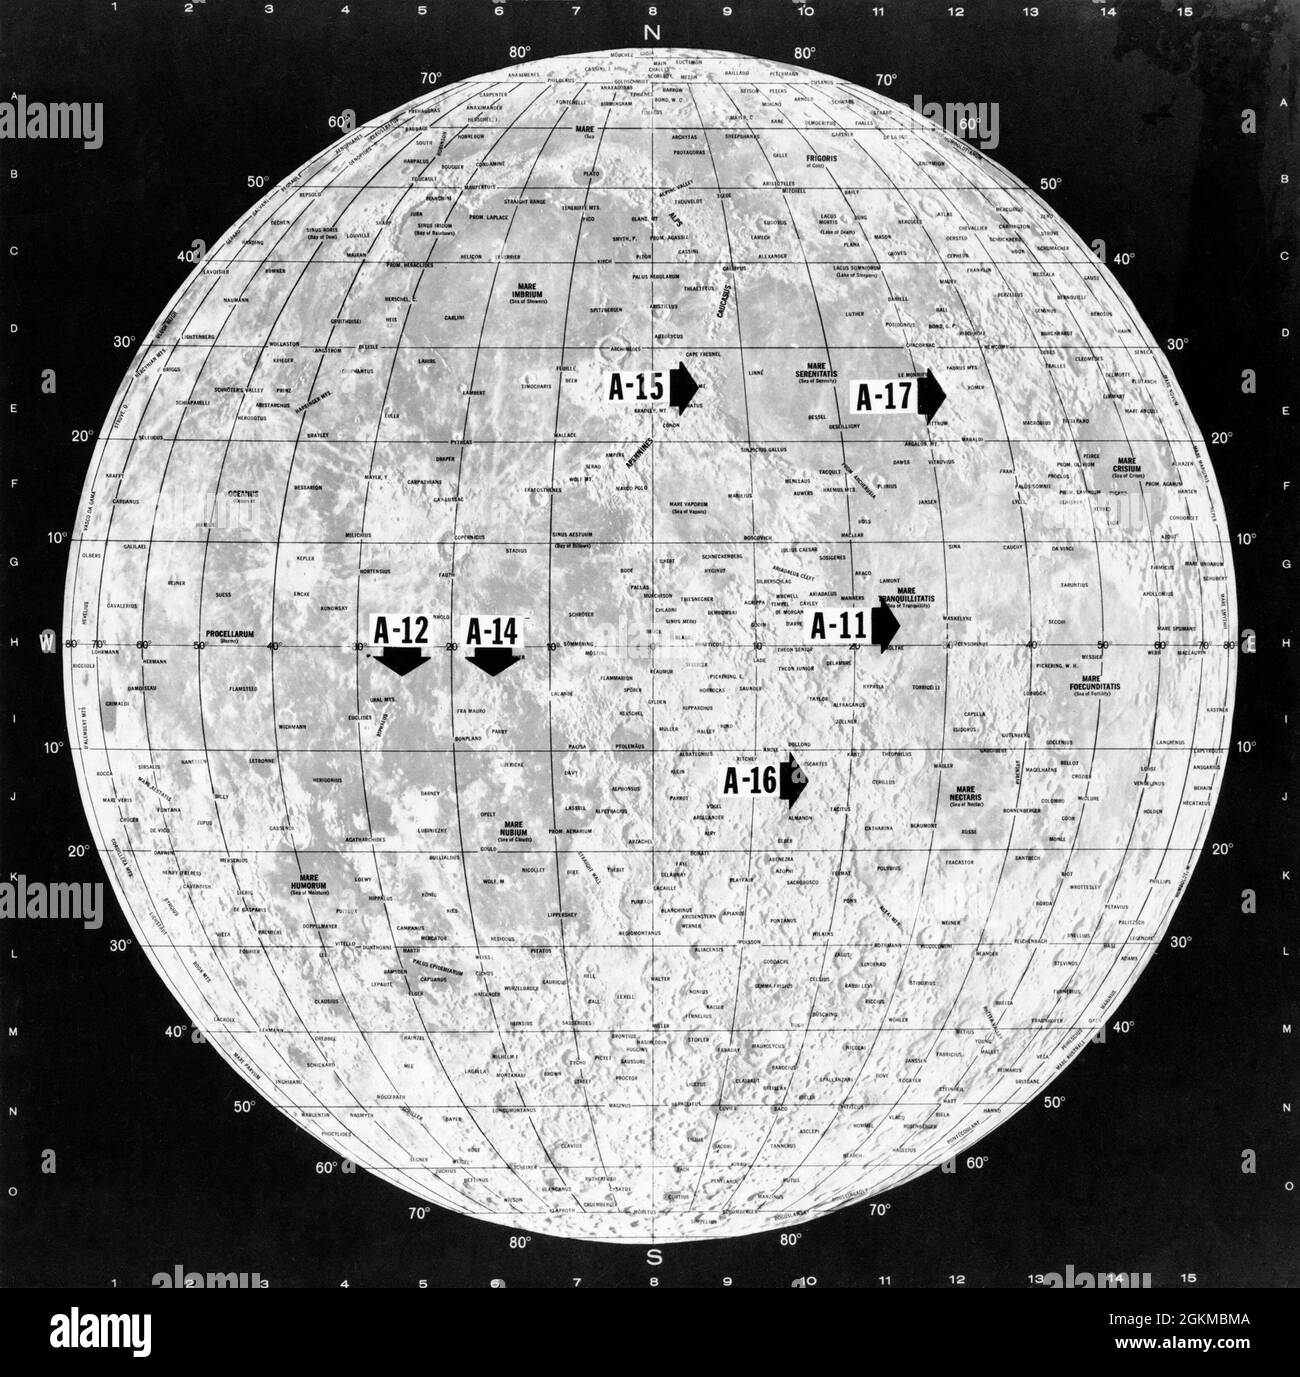 (March 1972) --- With four of the six planned lunar missions completed, this chart has been prepared to show the various areas of the lunar 'nearside' to be visited by astronauts representing the NASA Apollo program. Apollo's 11, 12, 14 and 15 are shown at their respective landing points. Apollo 16 and Apollo 17, planned for later this year at Descartes and Taurus Littrow, respectively, also are depicted on the map. Stock Photo